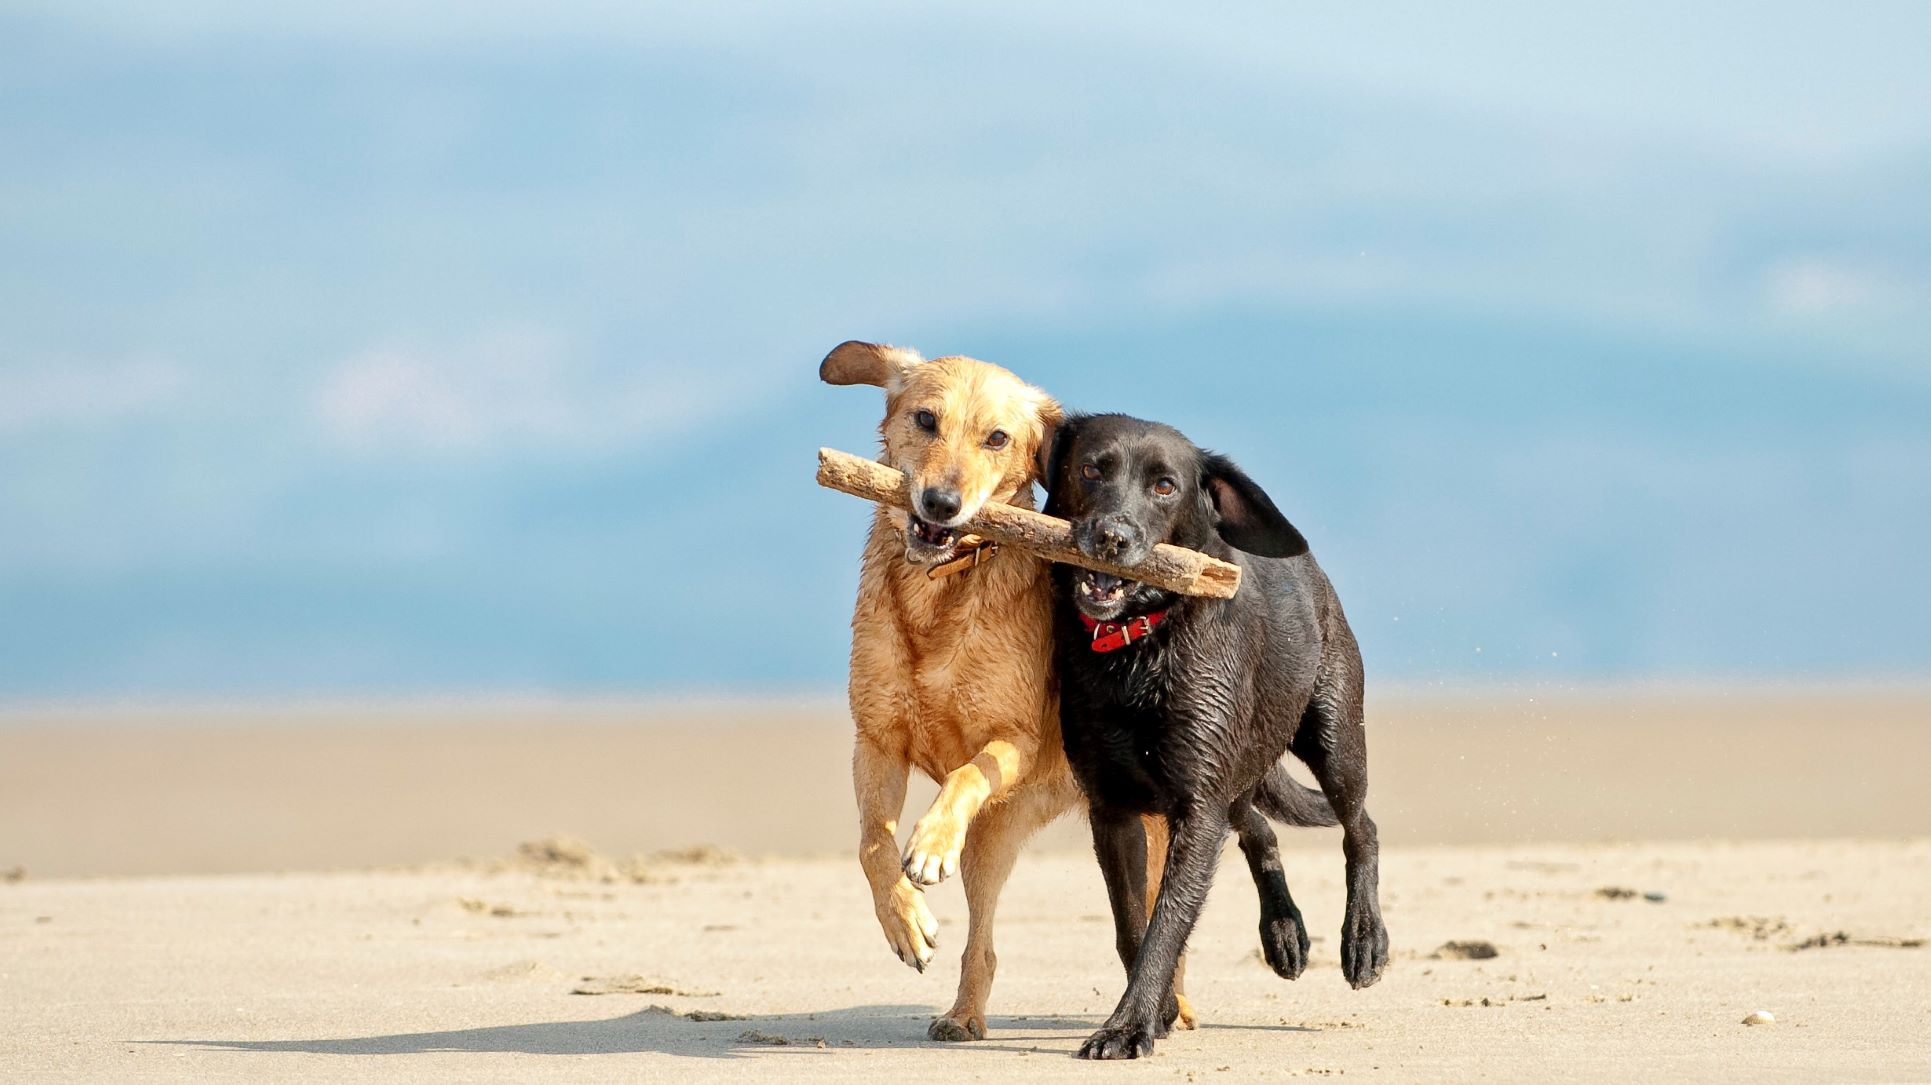 Two dogs run on a beach together